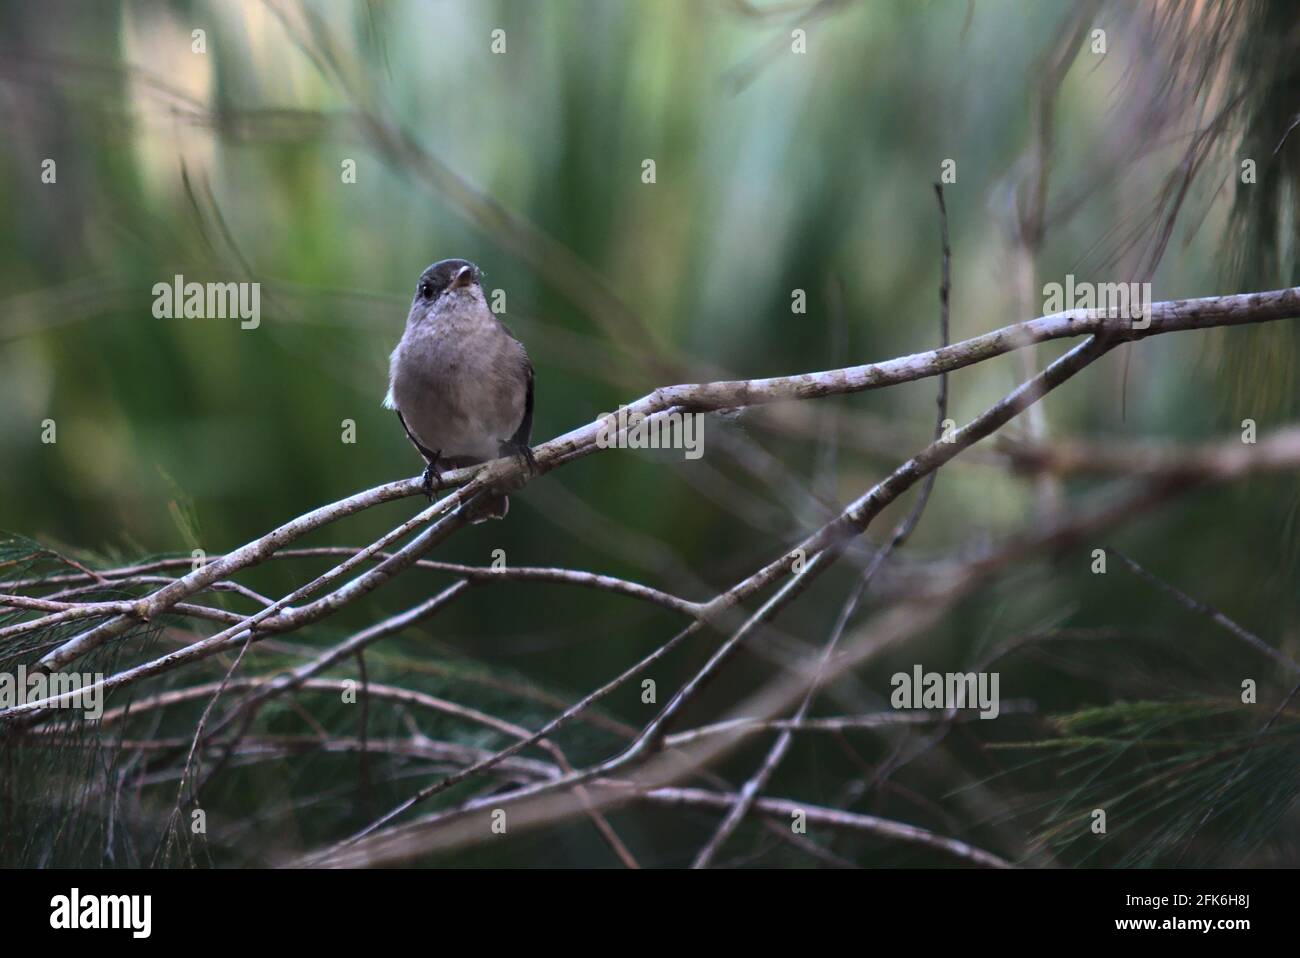 Small bird on a branch Stock Photo